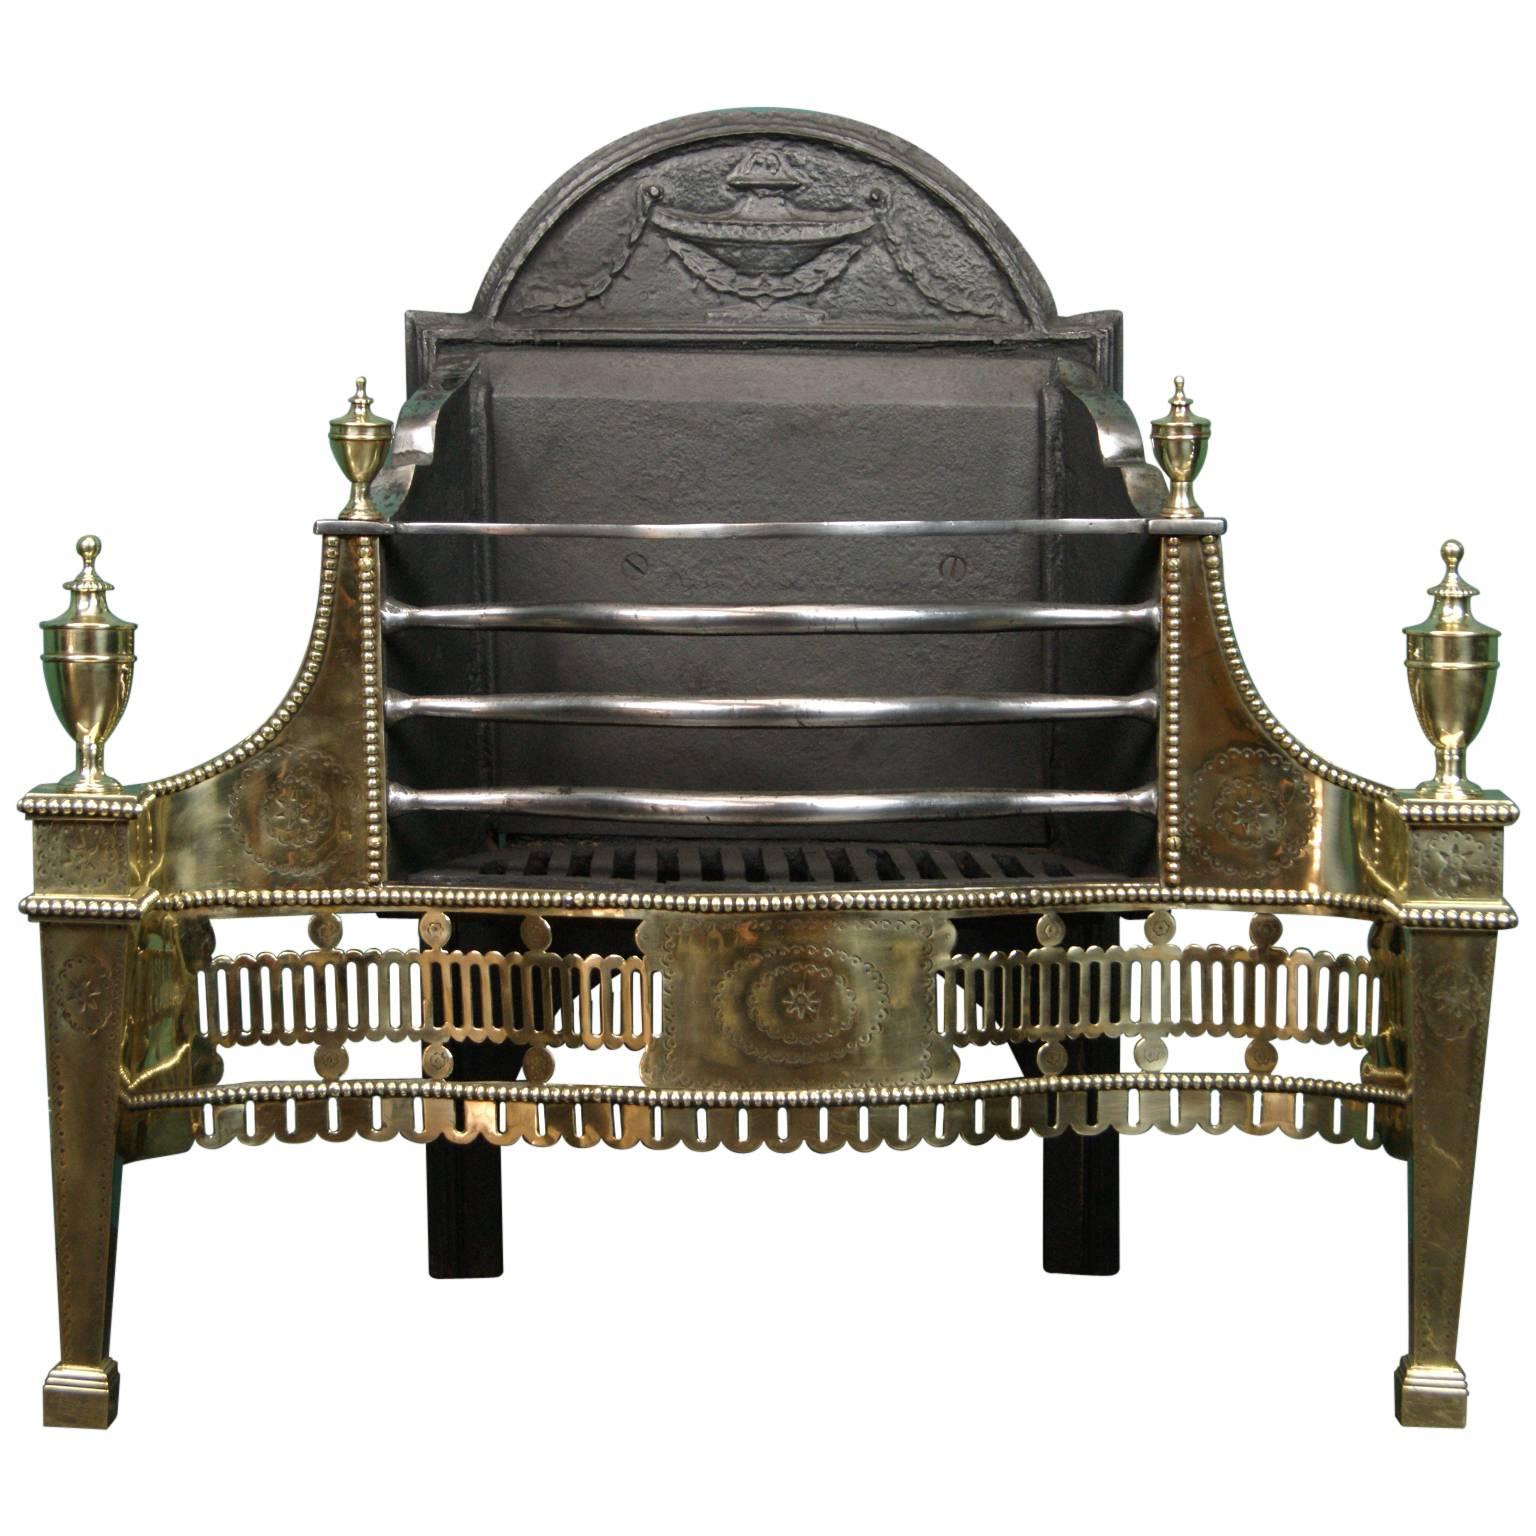 English Brass and Wrought-Iron Fireplace Fire Grate